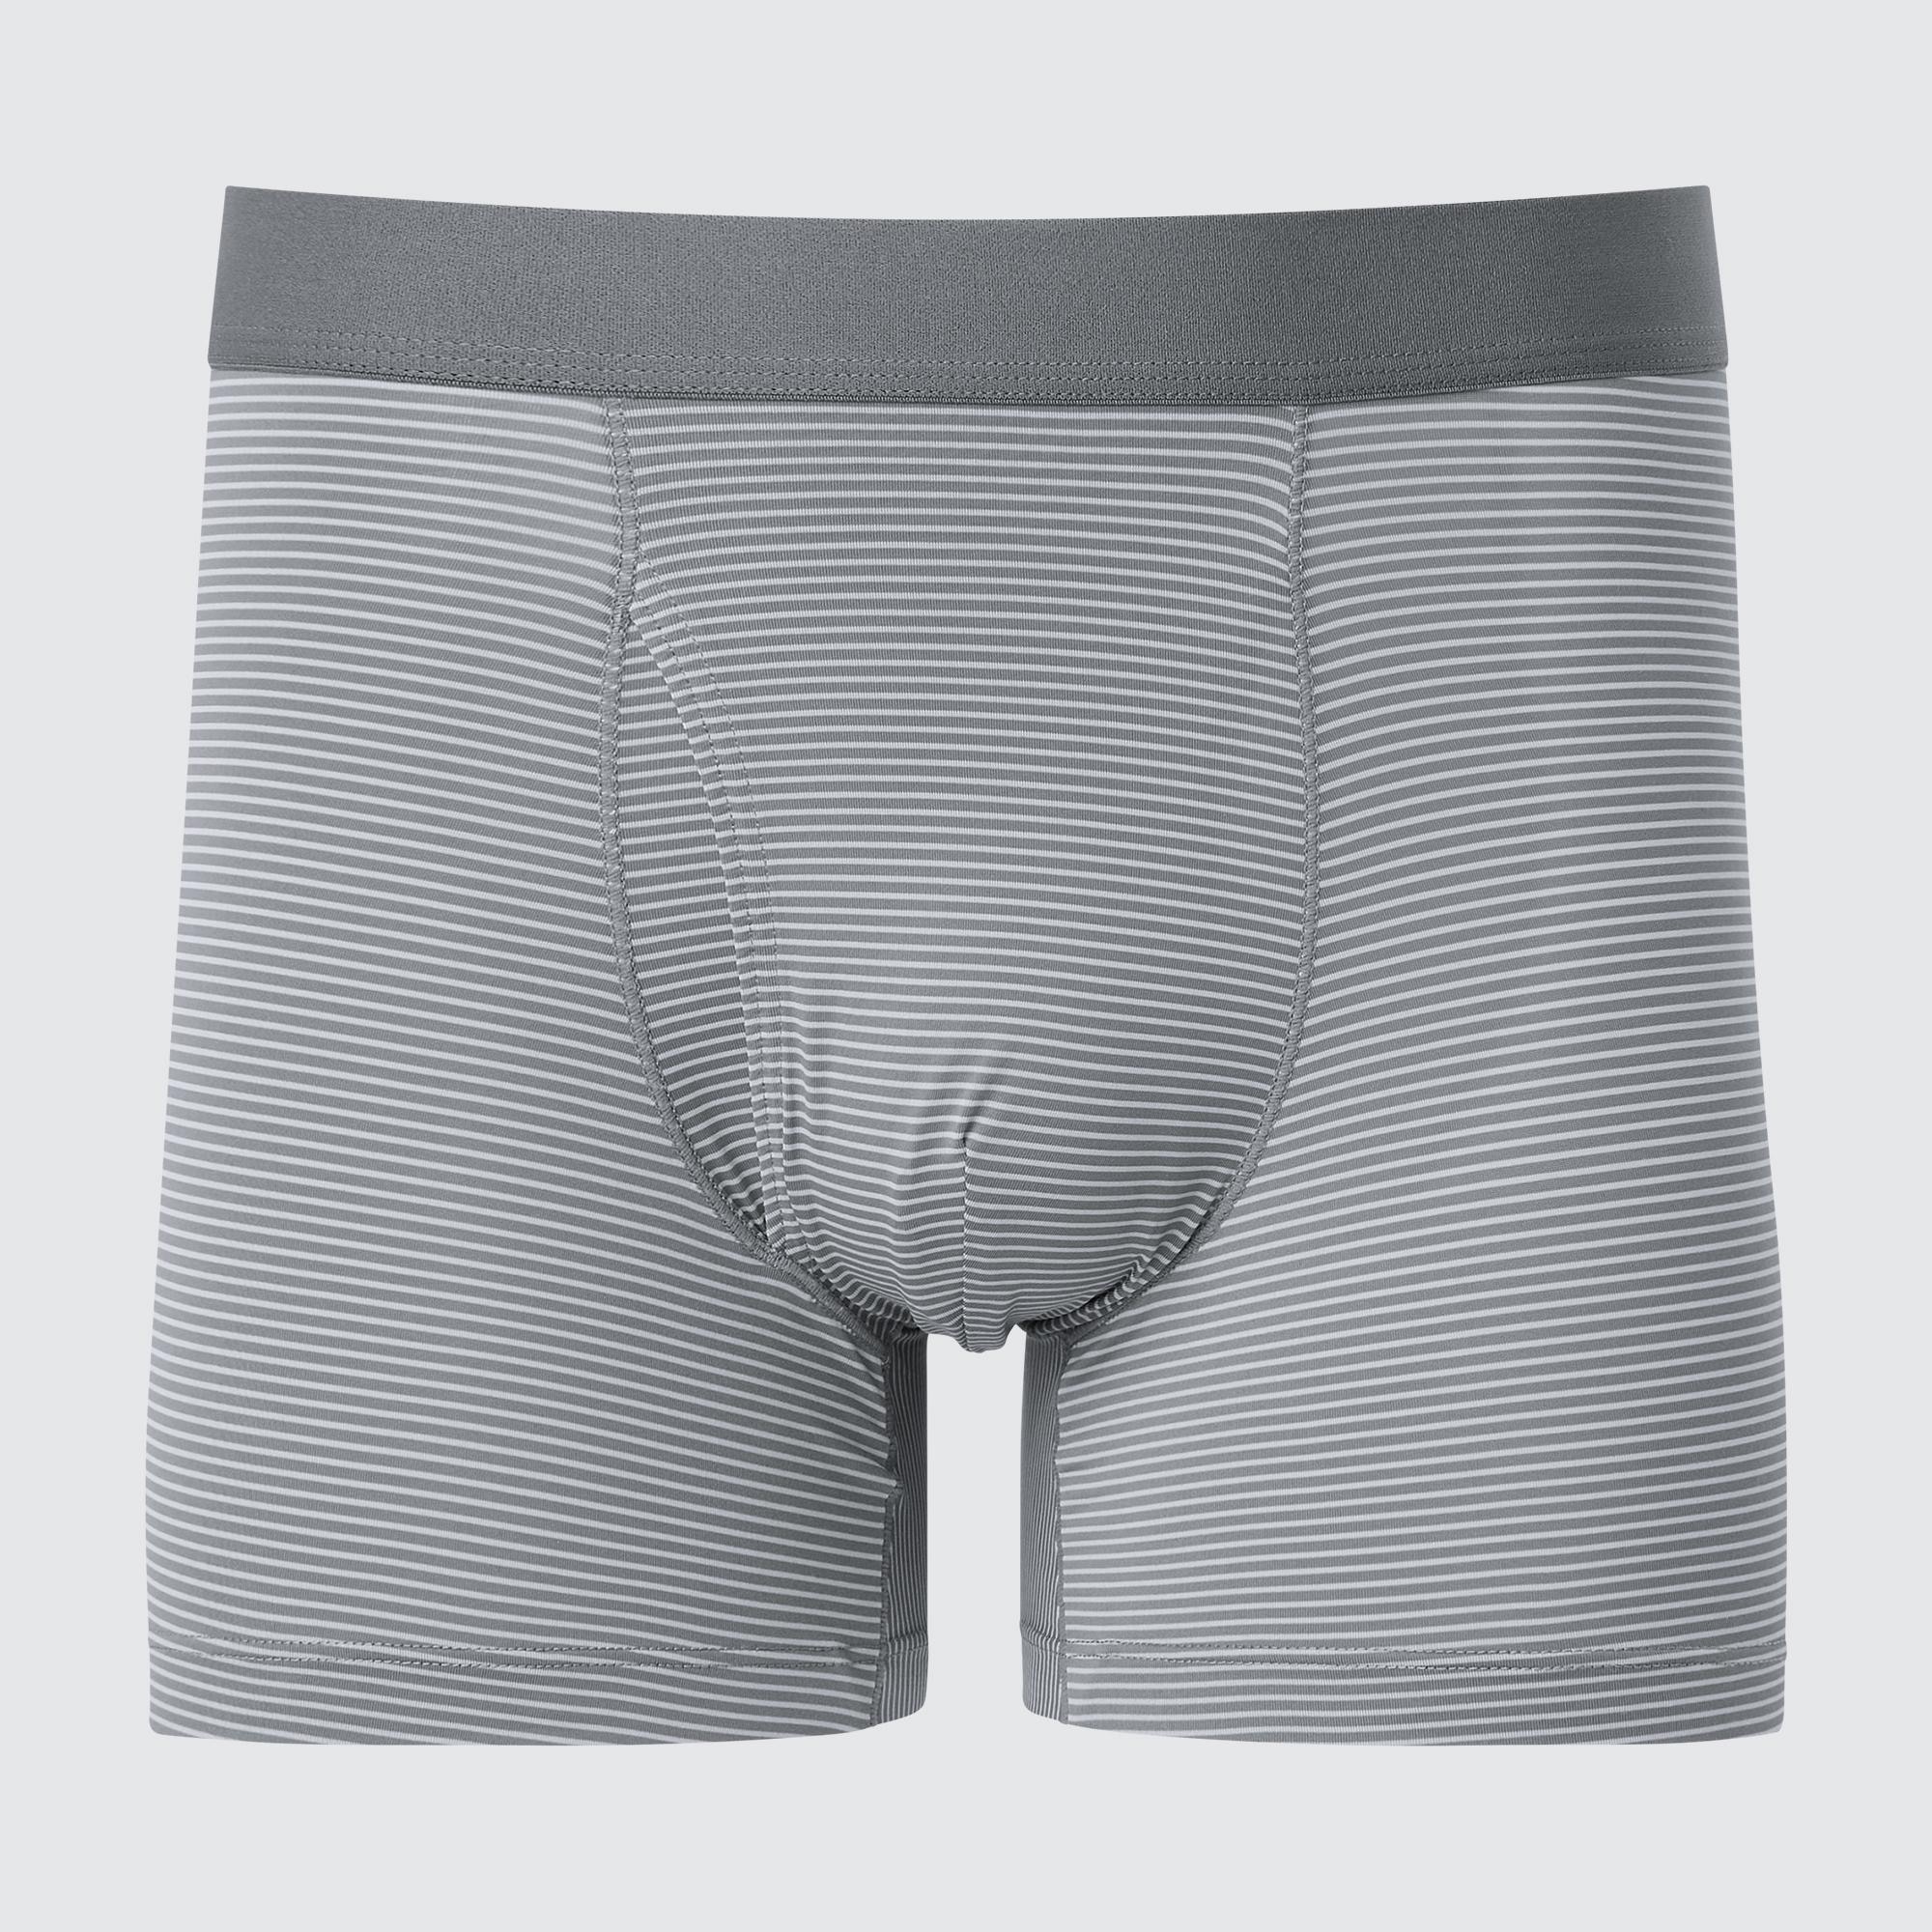 All Citizens: The Paradise Pocket Boxer Briefs are now restocked